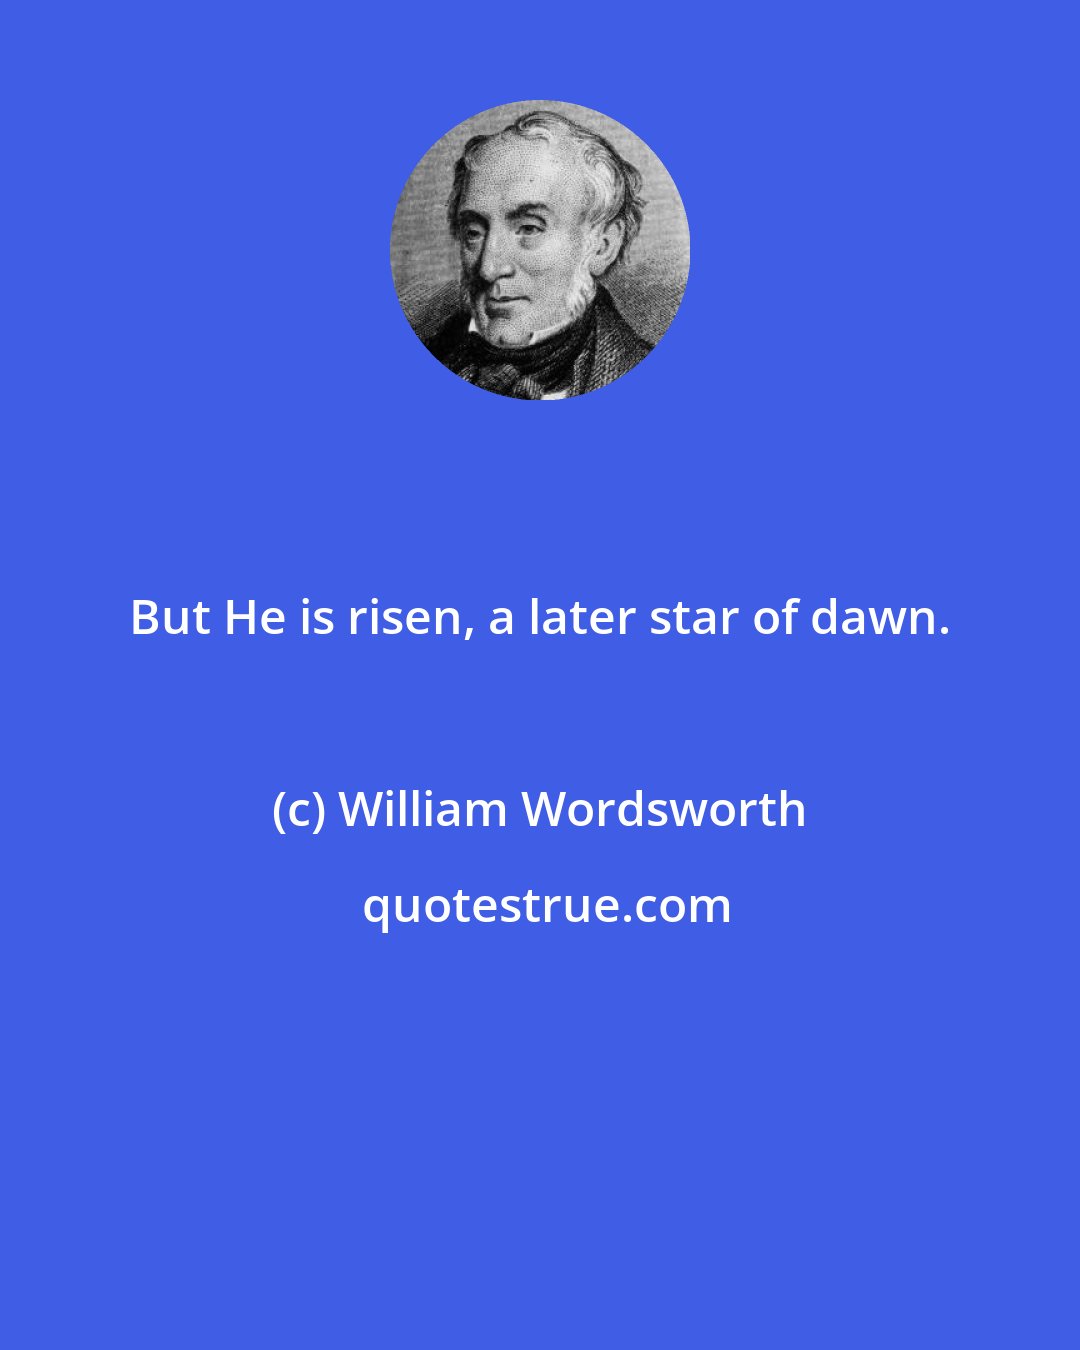 William Wordsworth: But He is risen, a later star of dawn.